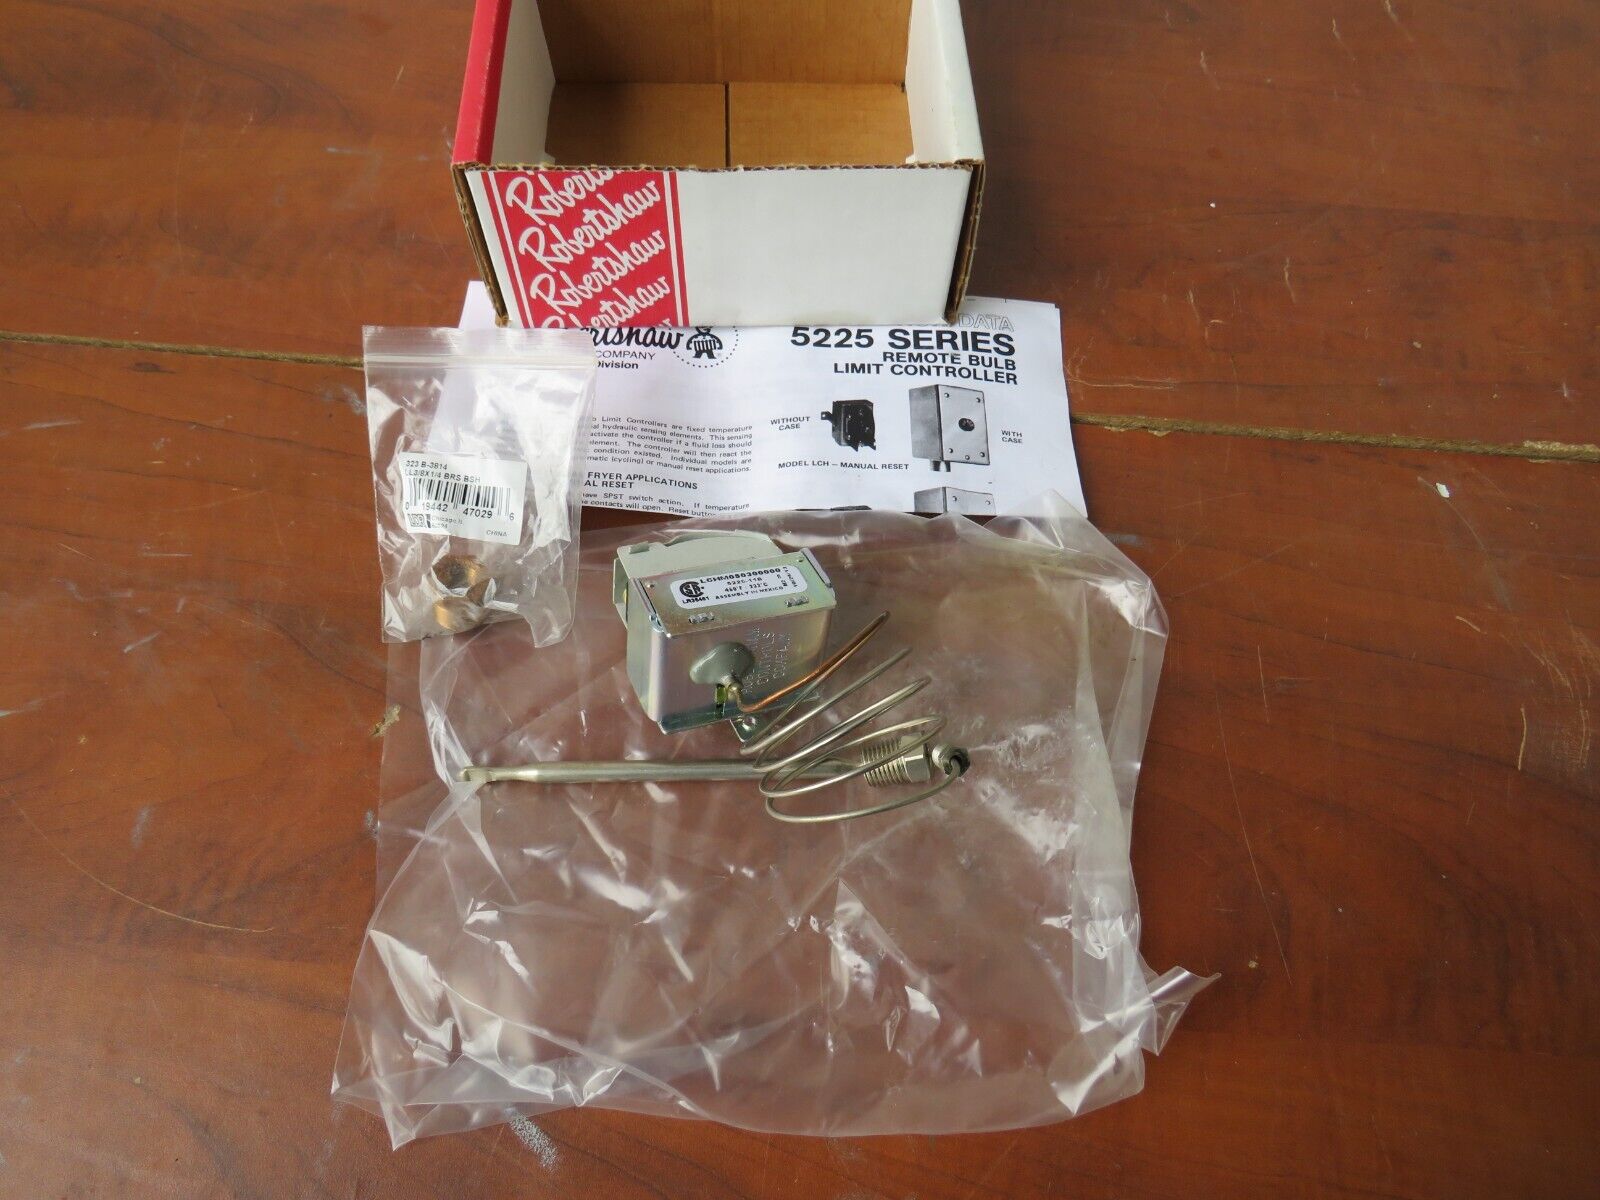 5225-112 Robertshaw LCHM050300000 Fryer Oven Limit Thermostat 48-1006 PP10084